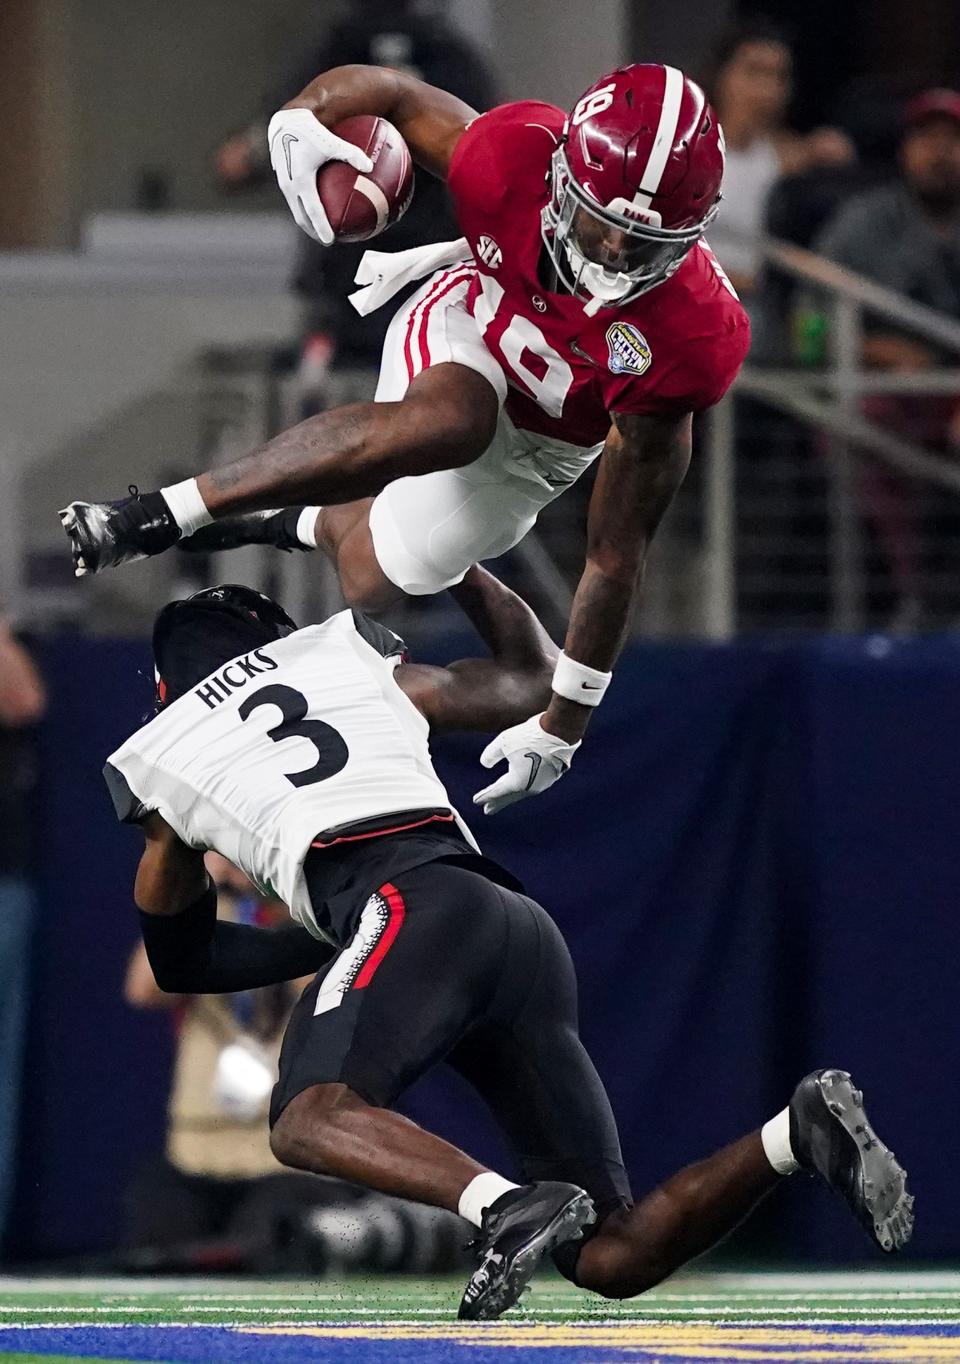 Alabama tight end Jahleel Billingsley (19) tries to hurdle Cincinnati safety Ja'von Hicks (3) in the 2021 College Football Playoff Semifinal game at the 86th Cotton Bowl in AT&T Stadium in Arlington, Texas Friday, Dec. 31, 2021. [Staff Photo/Gary Cosby Jr.]